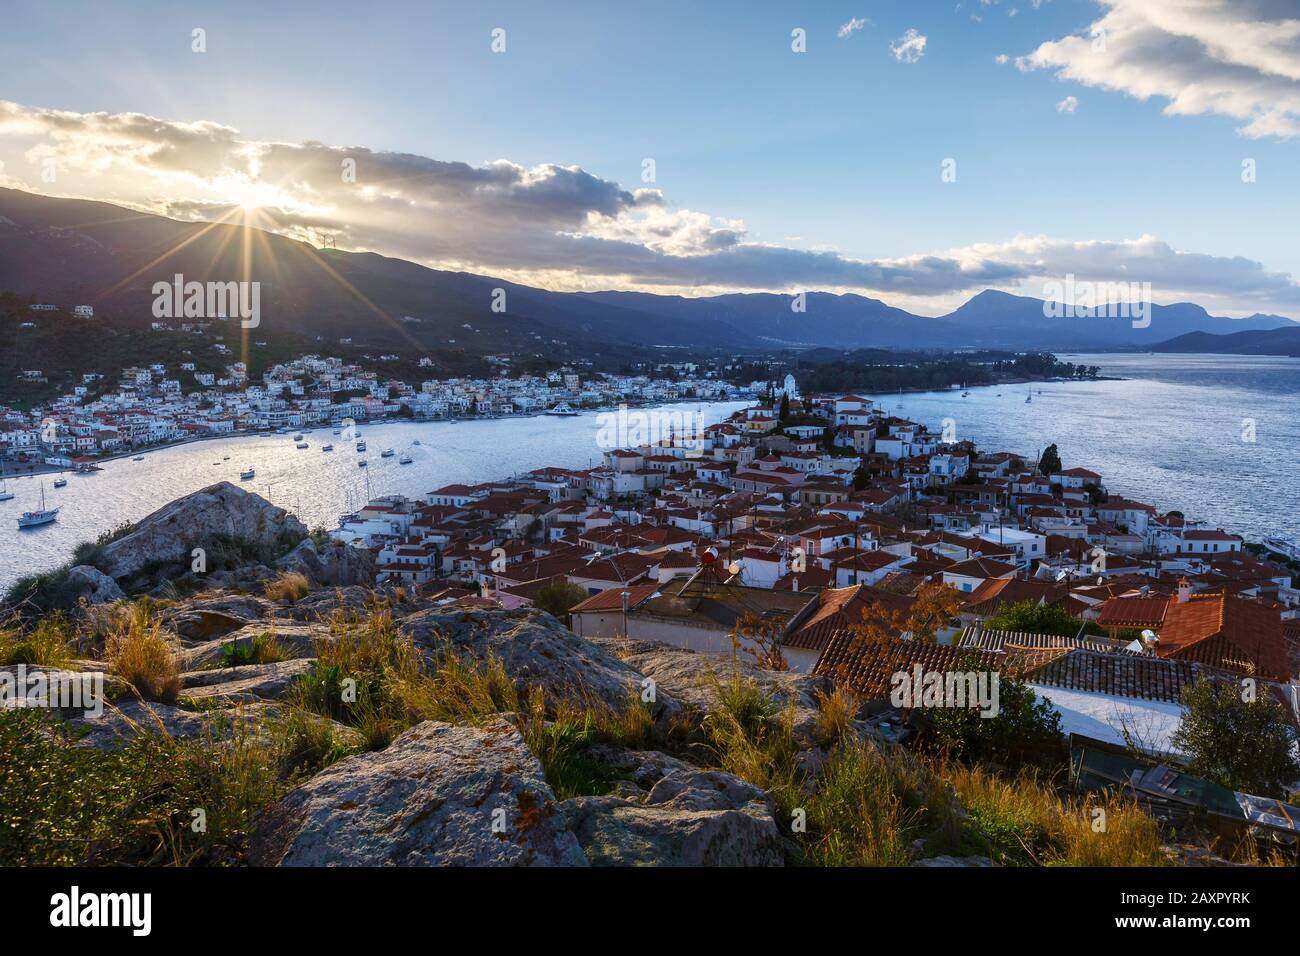 View of the Chora village of Poros island and Galatas village in Peloponnese, Greece. Stock Photo